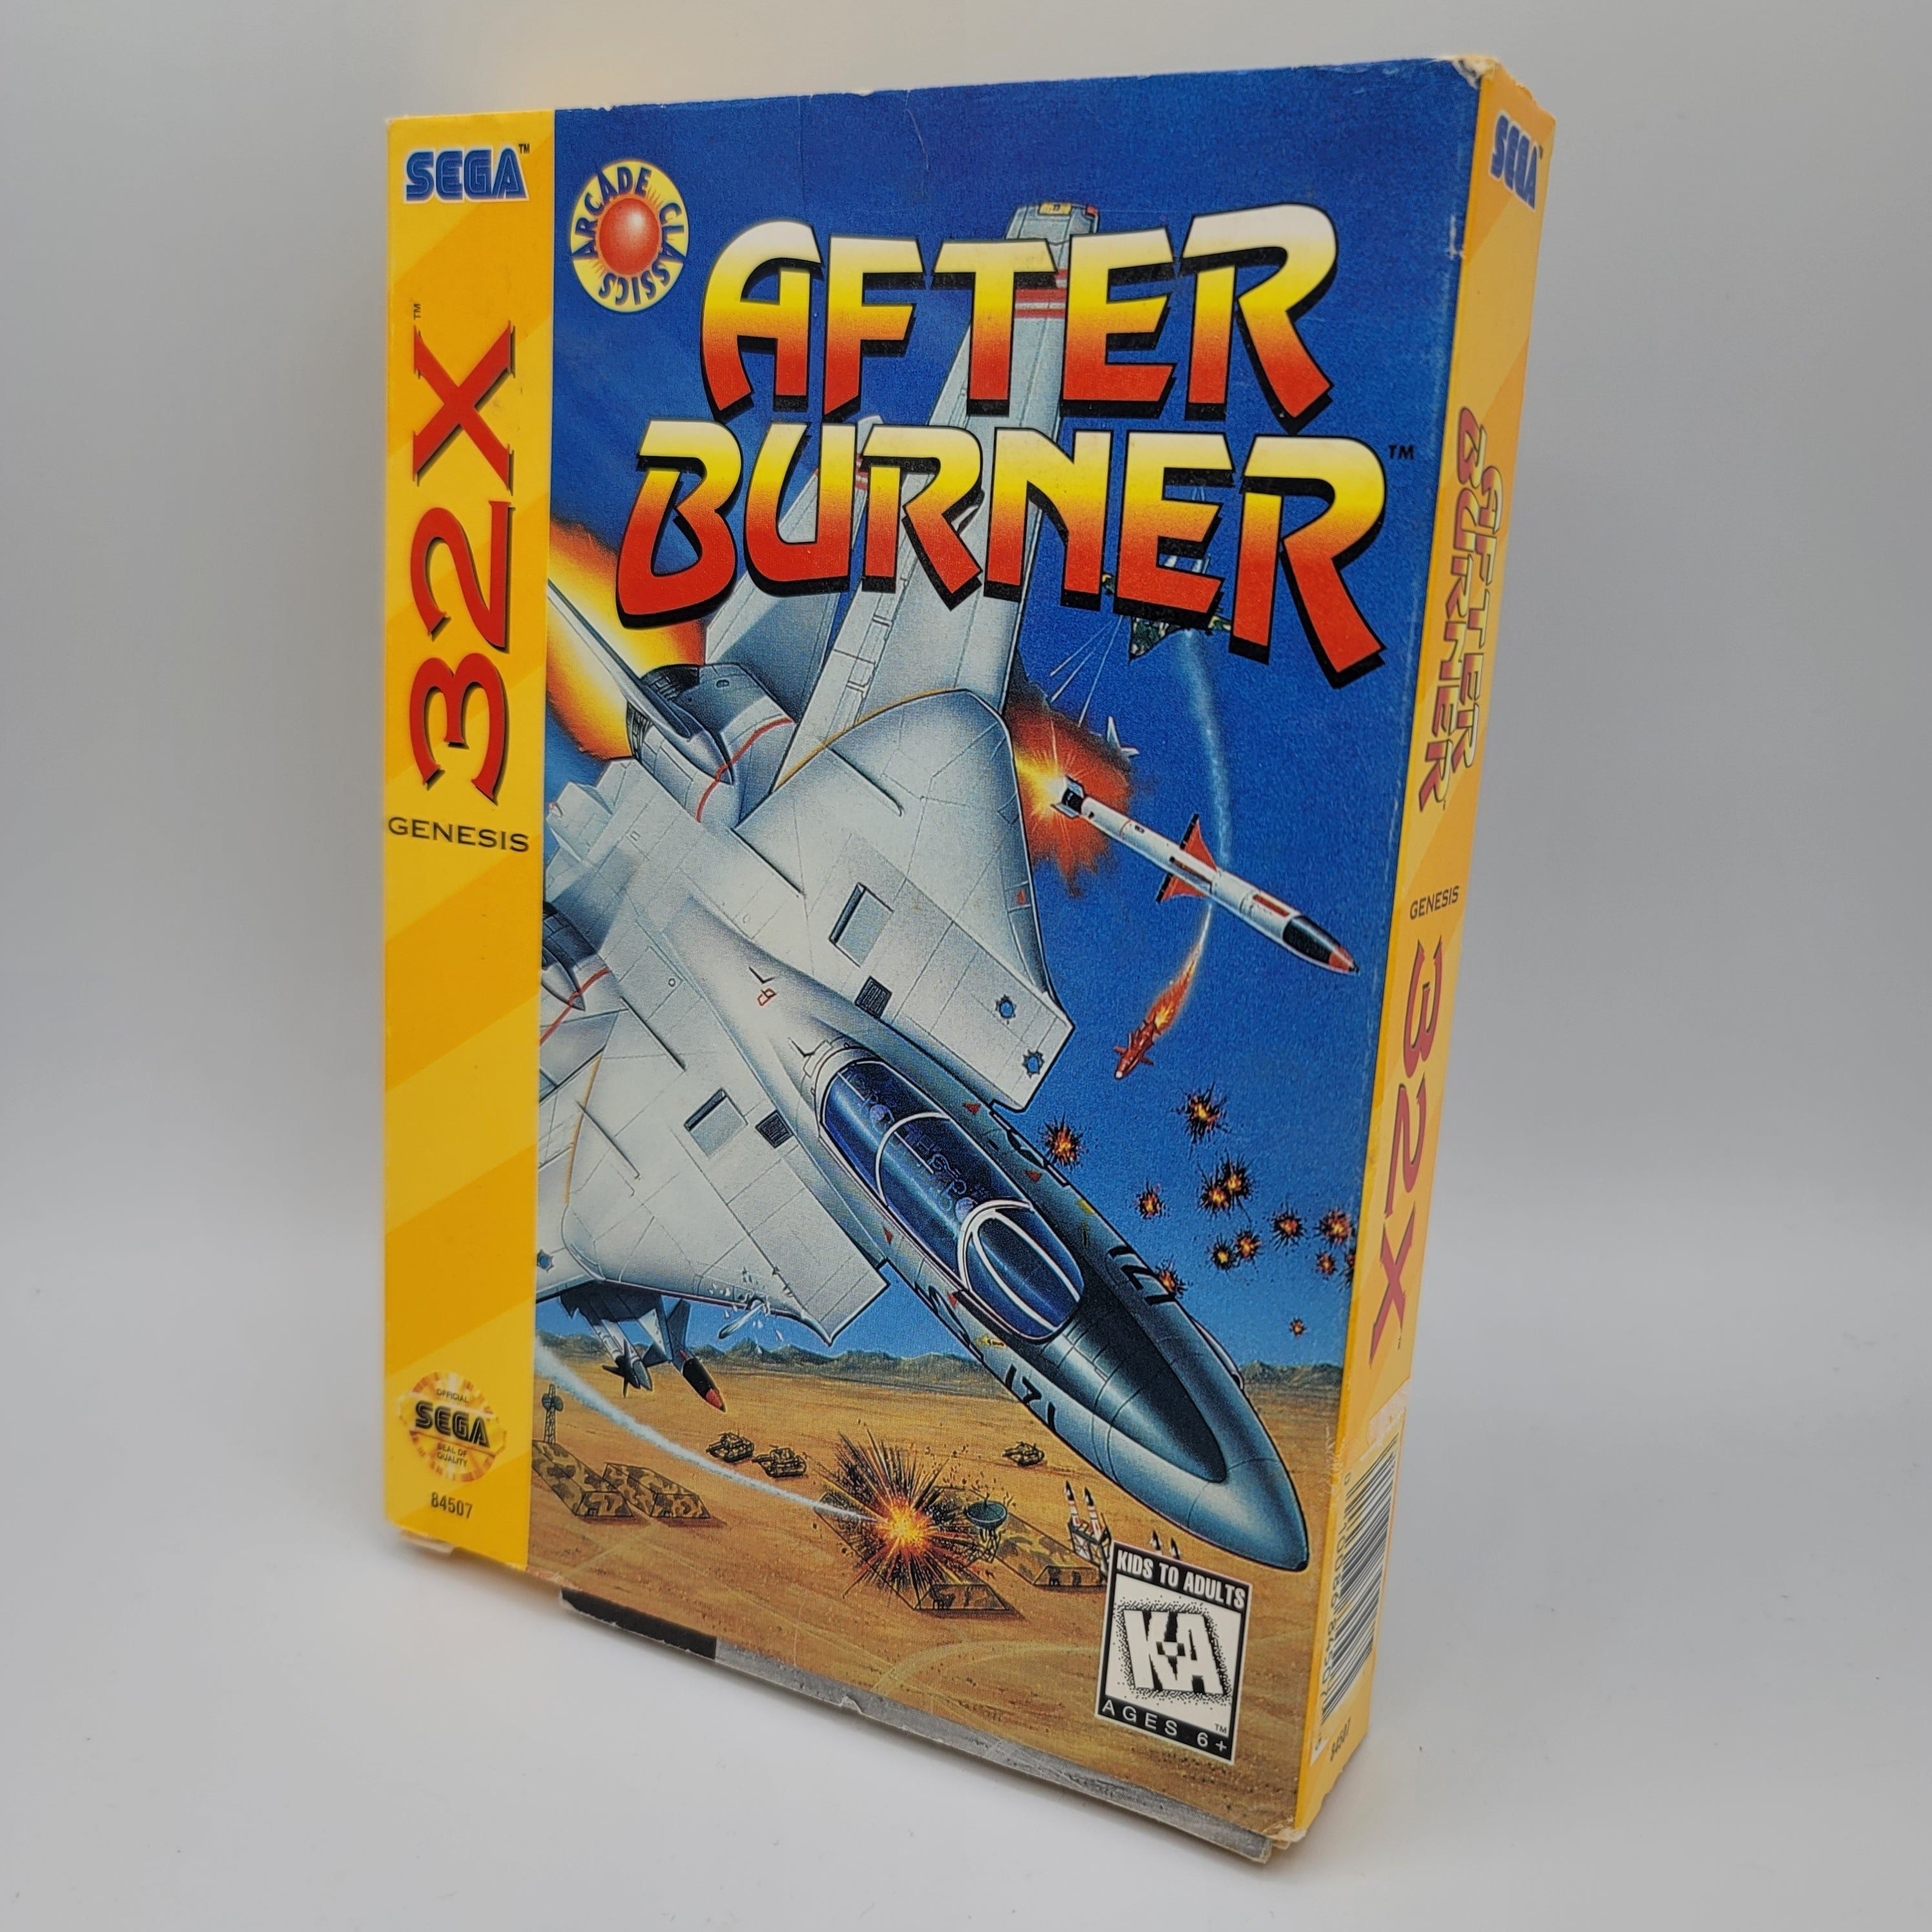 32X - After Burner (Complete in Box / With Manual)